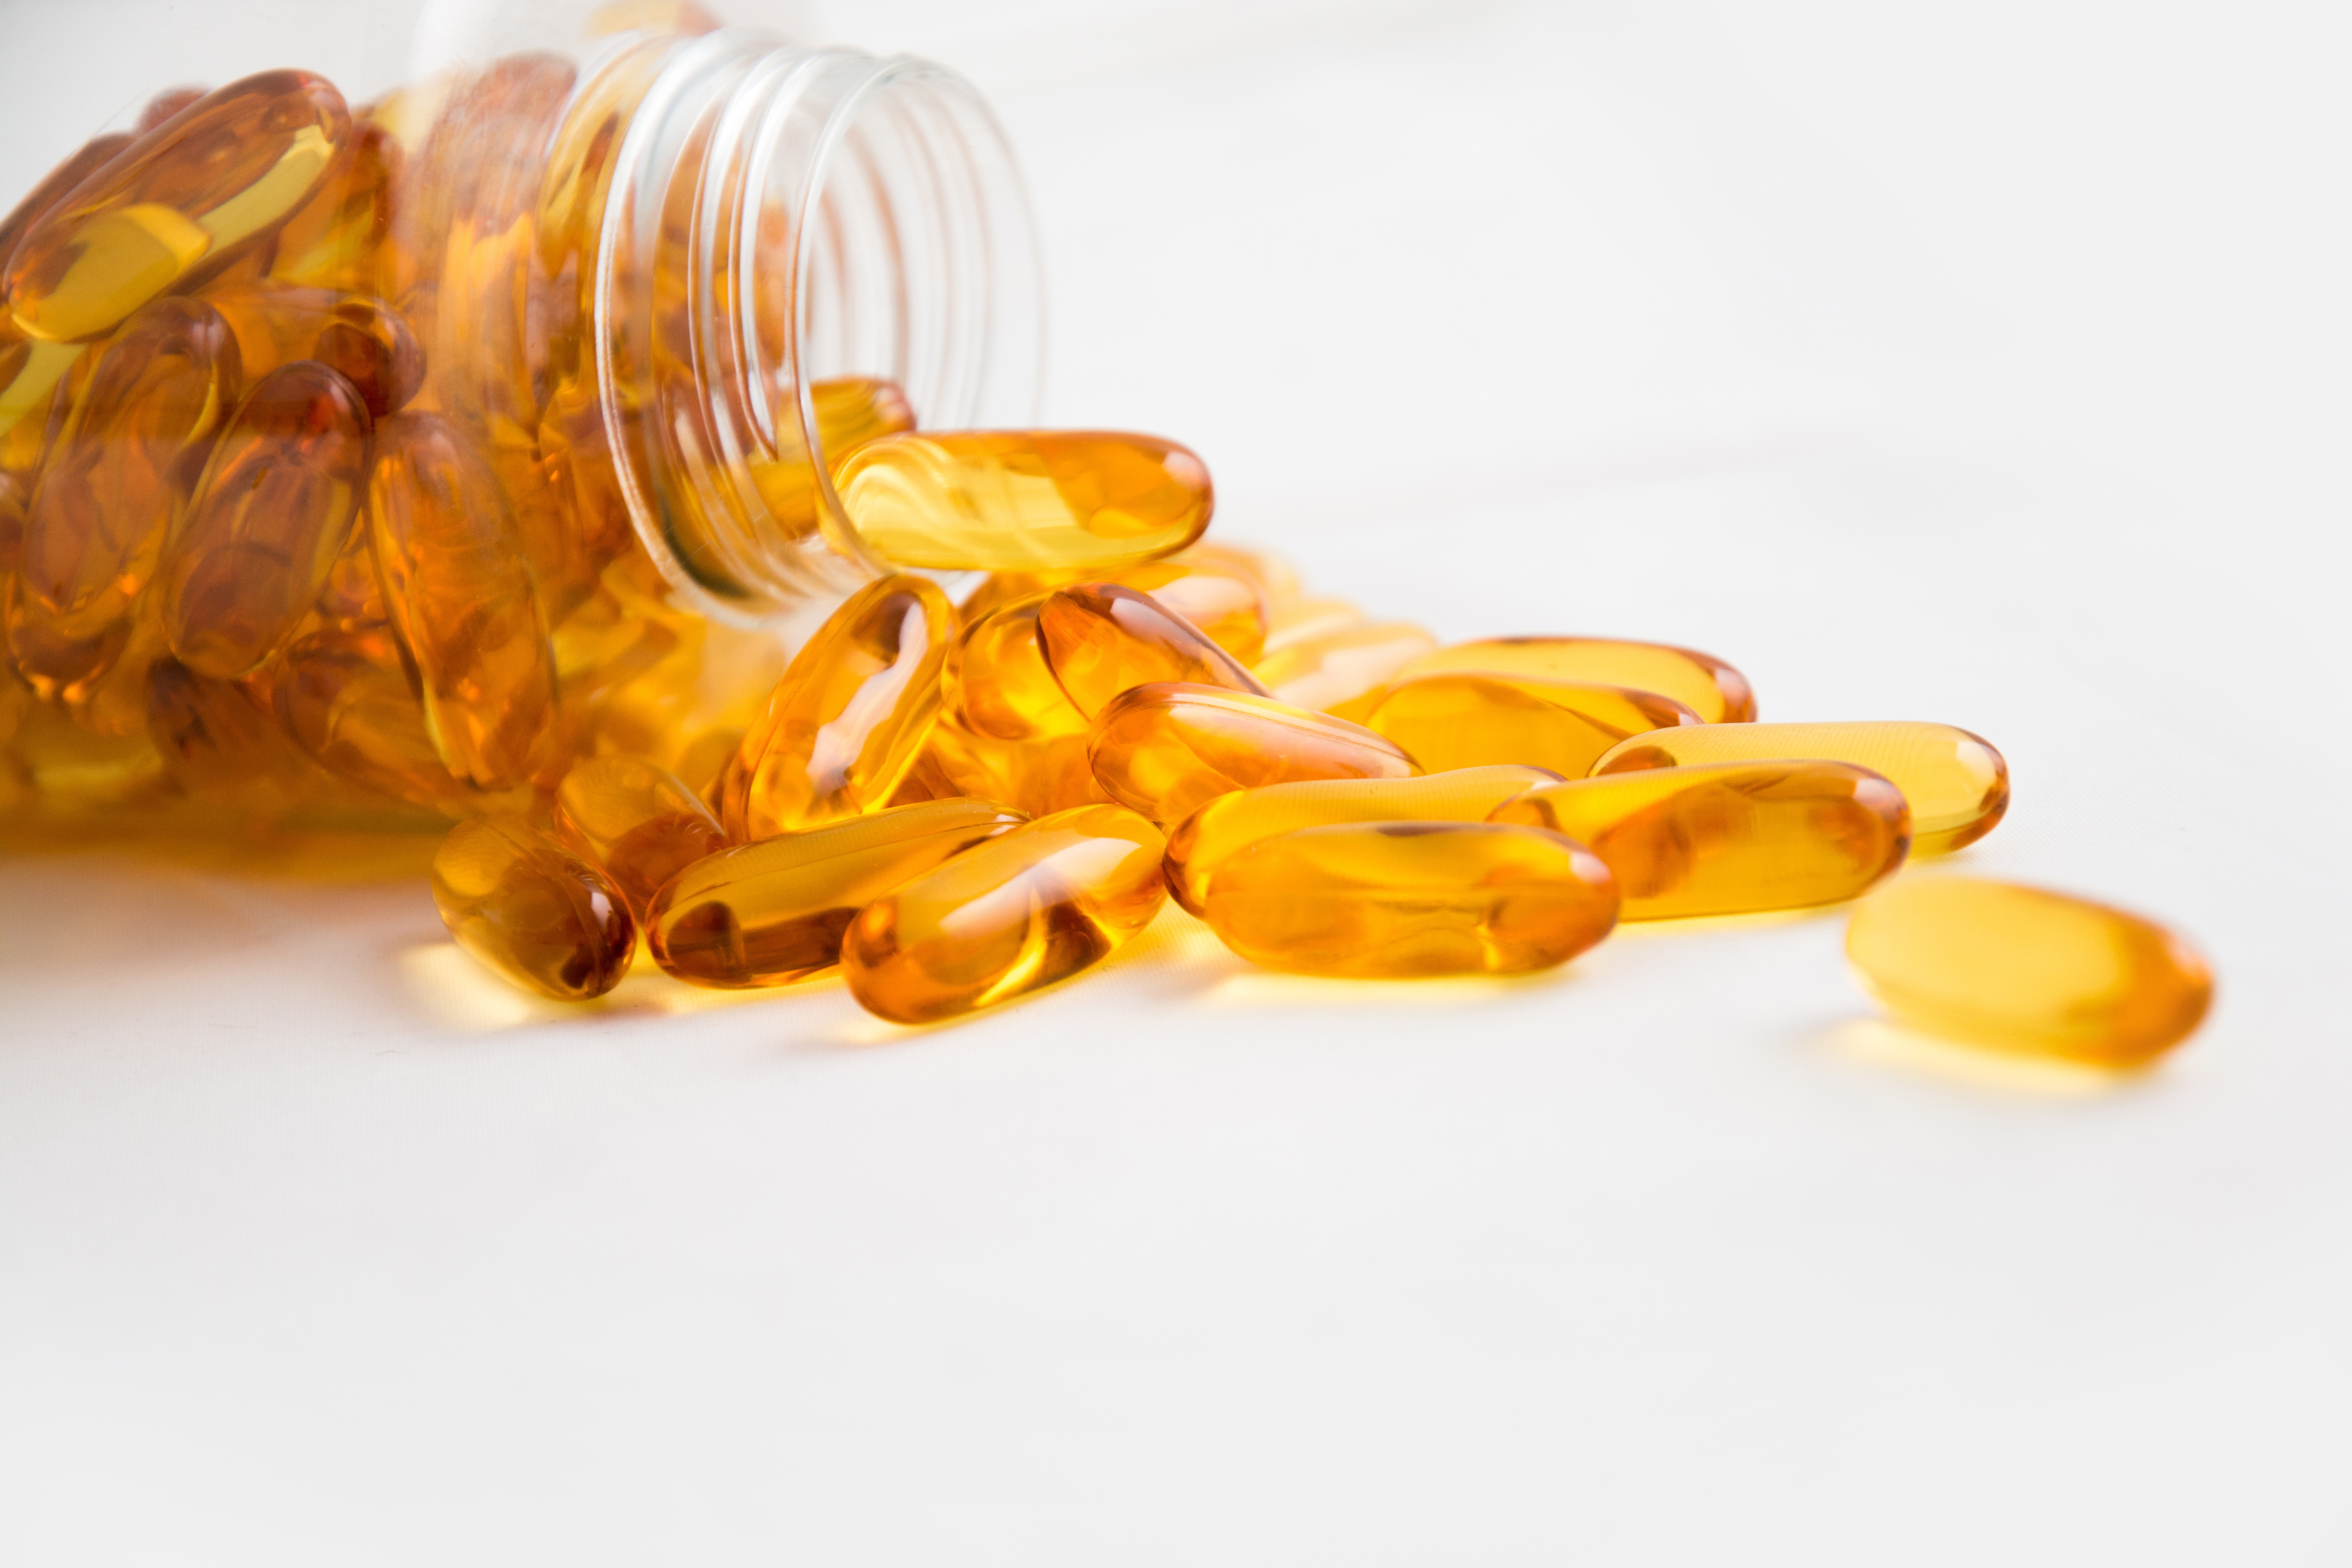 is fish oil a natural pain reliever?